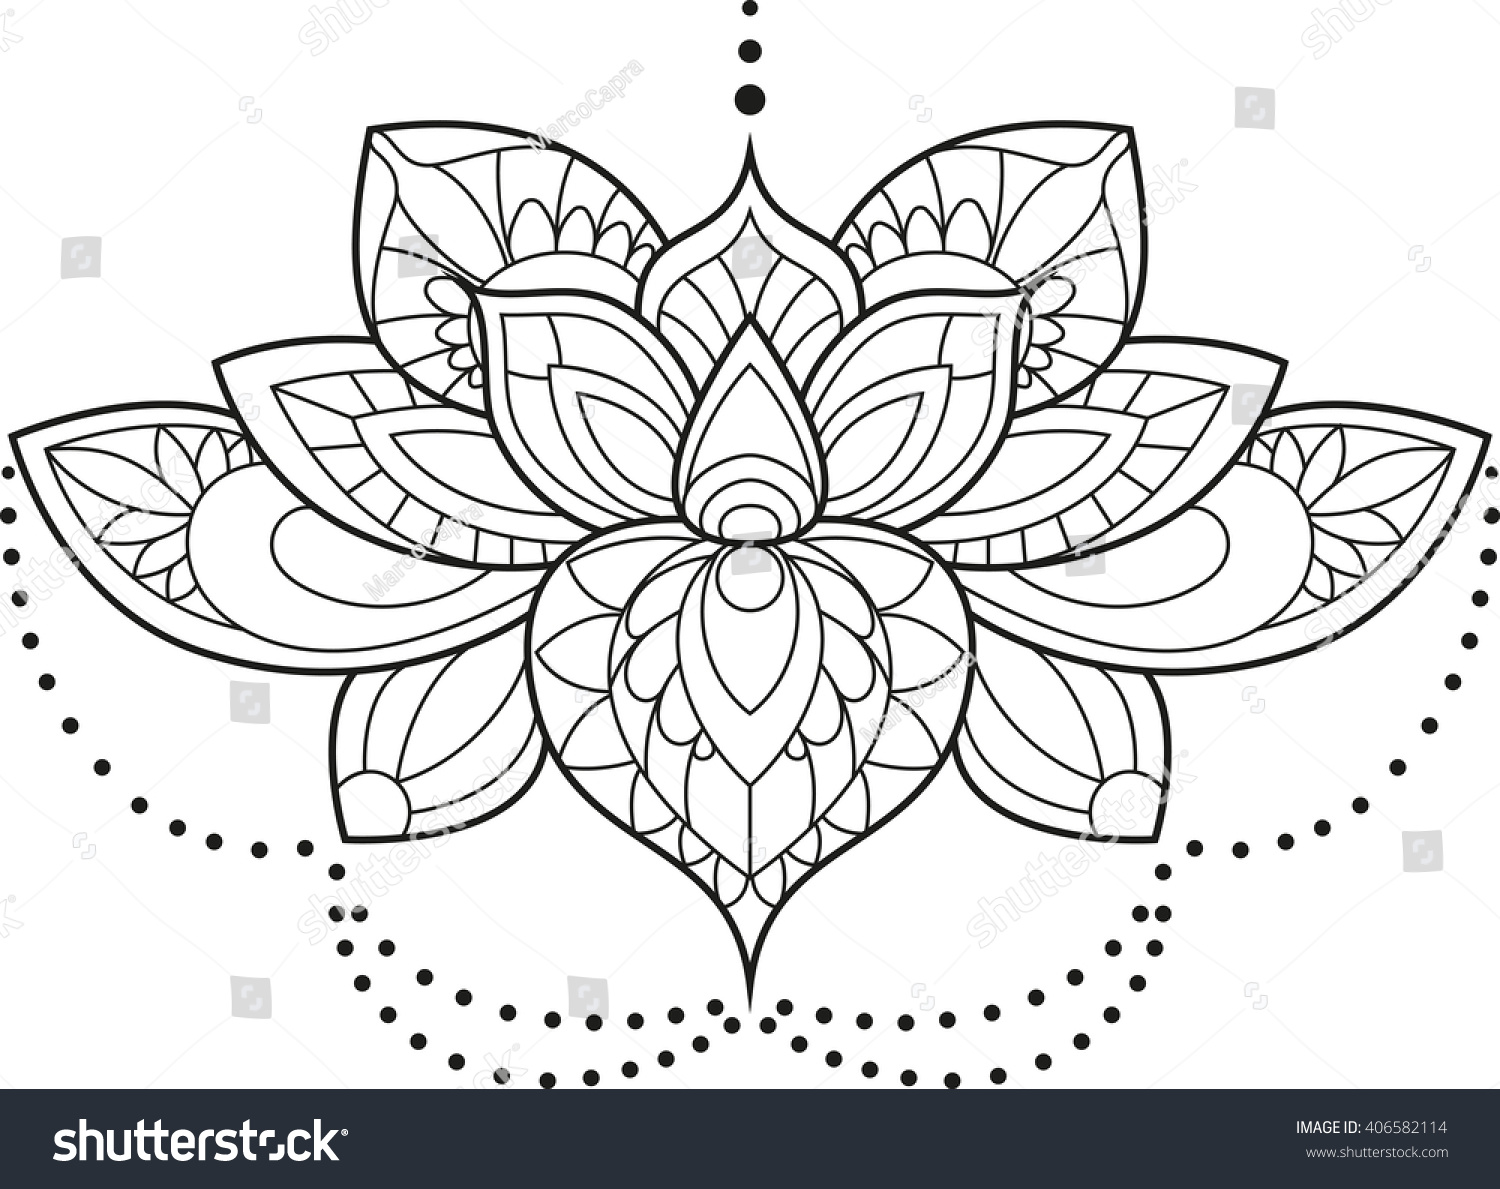 Download Vector Illustration Of A Mandala Lotus Flower In Black And ...